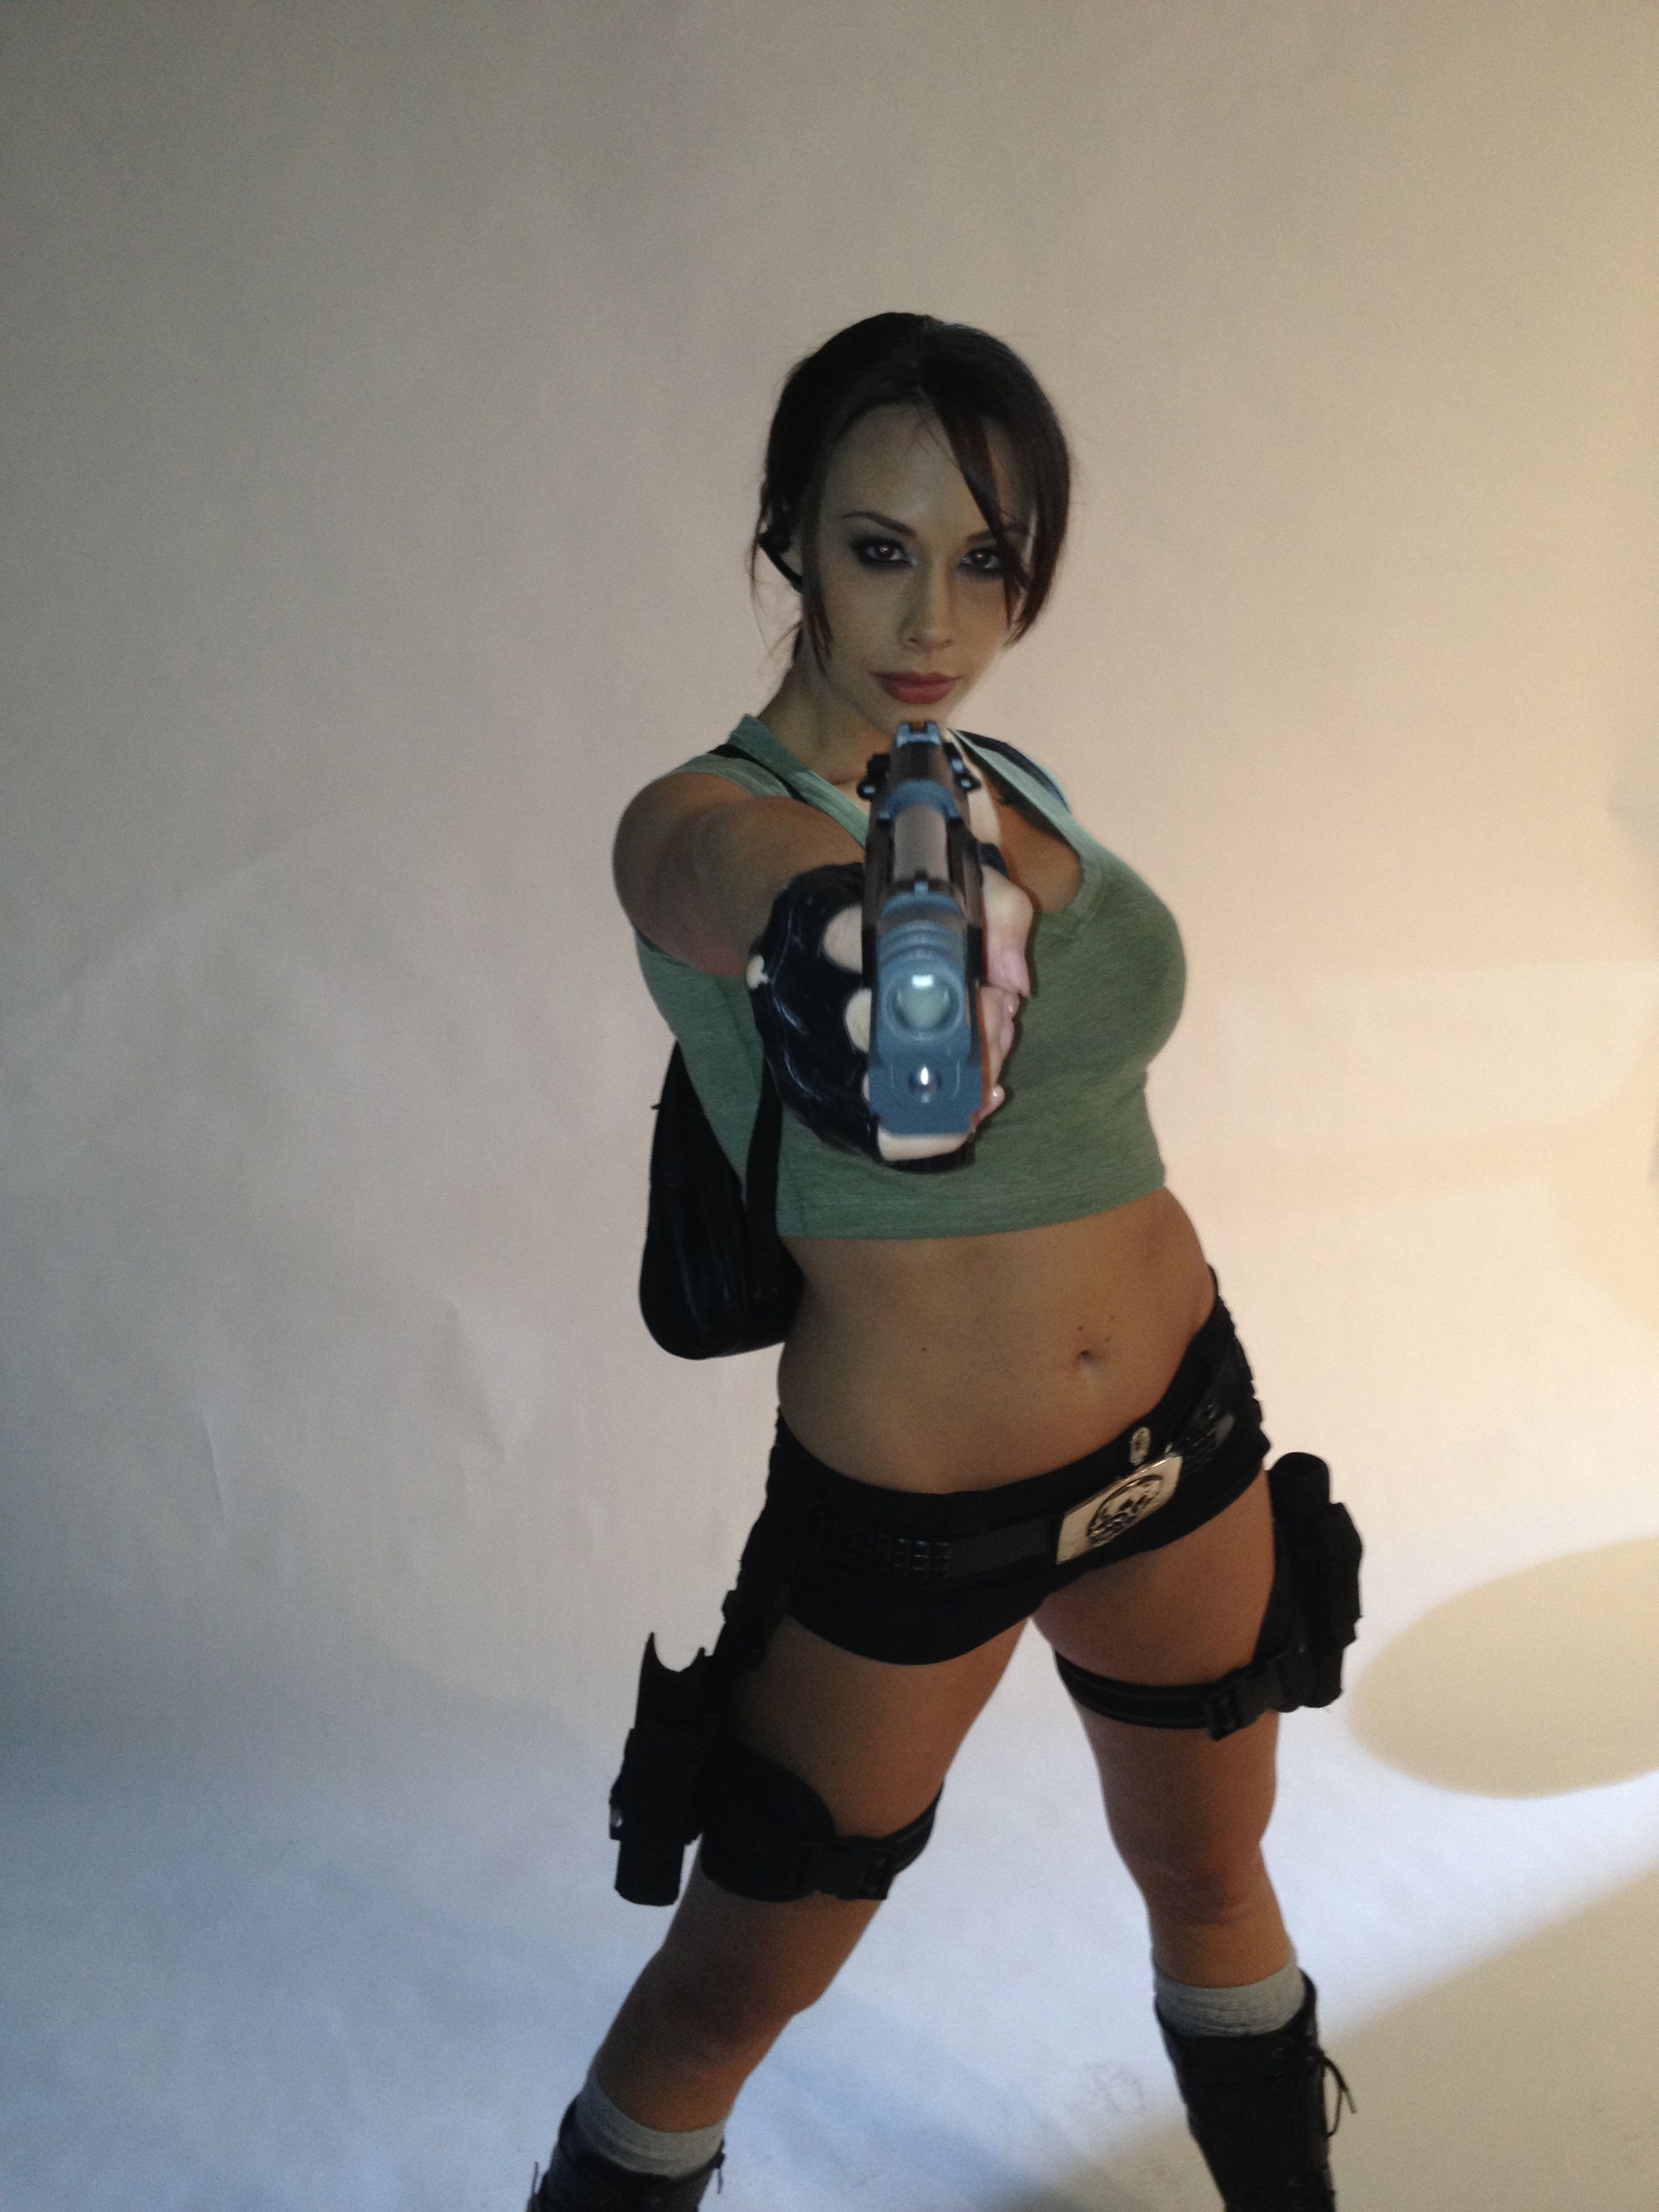 Adult Films Tomb Raider Gets The Parody Treatment Exclusive 2